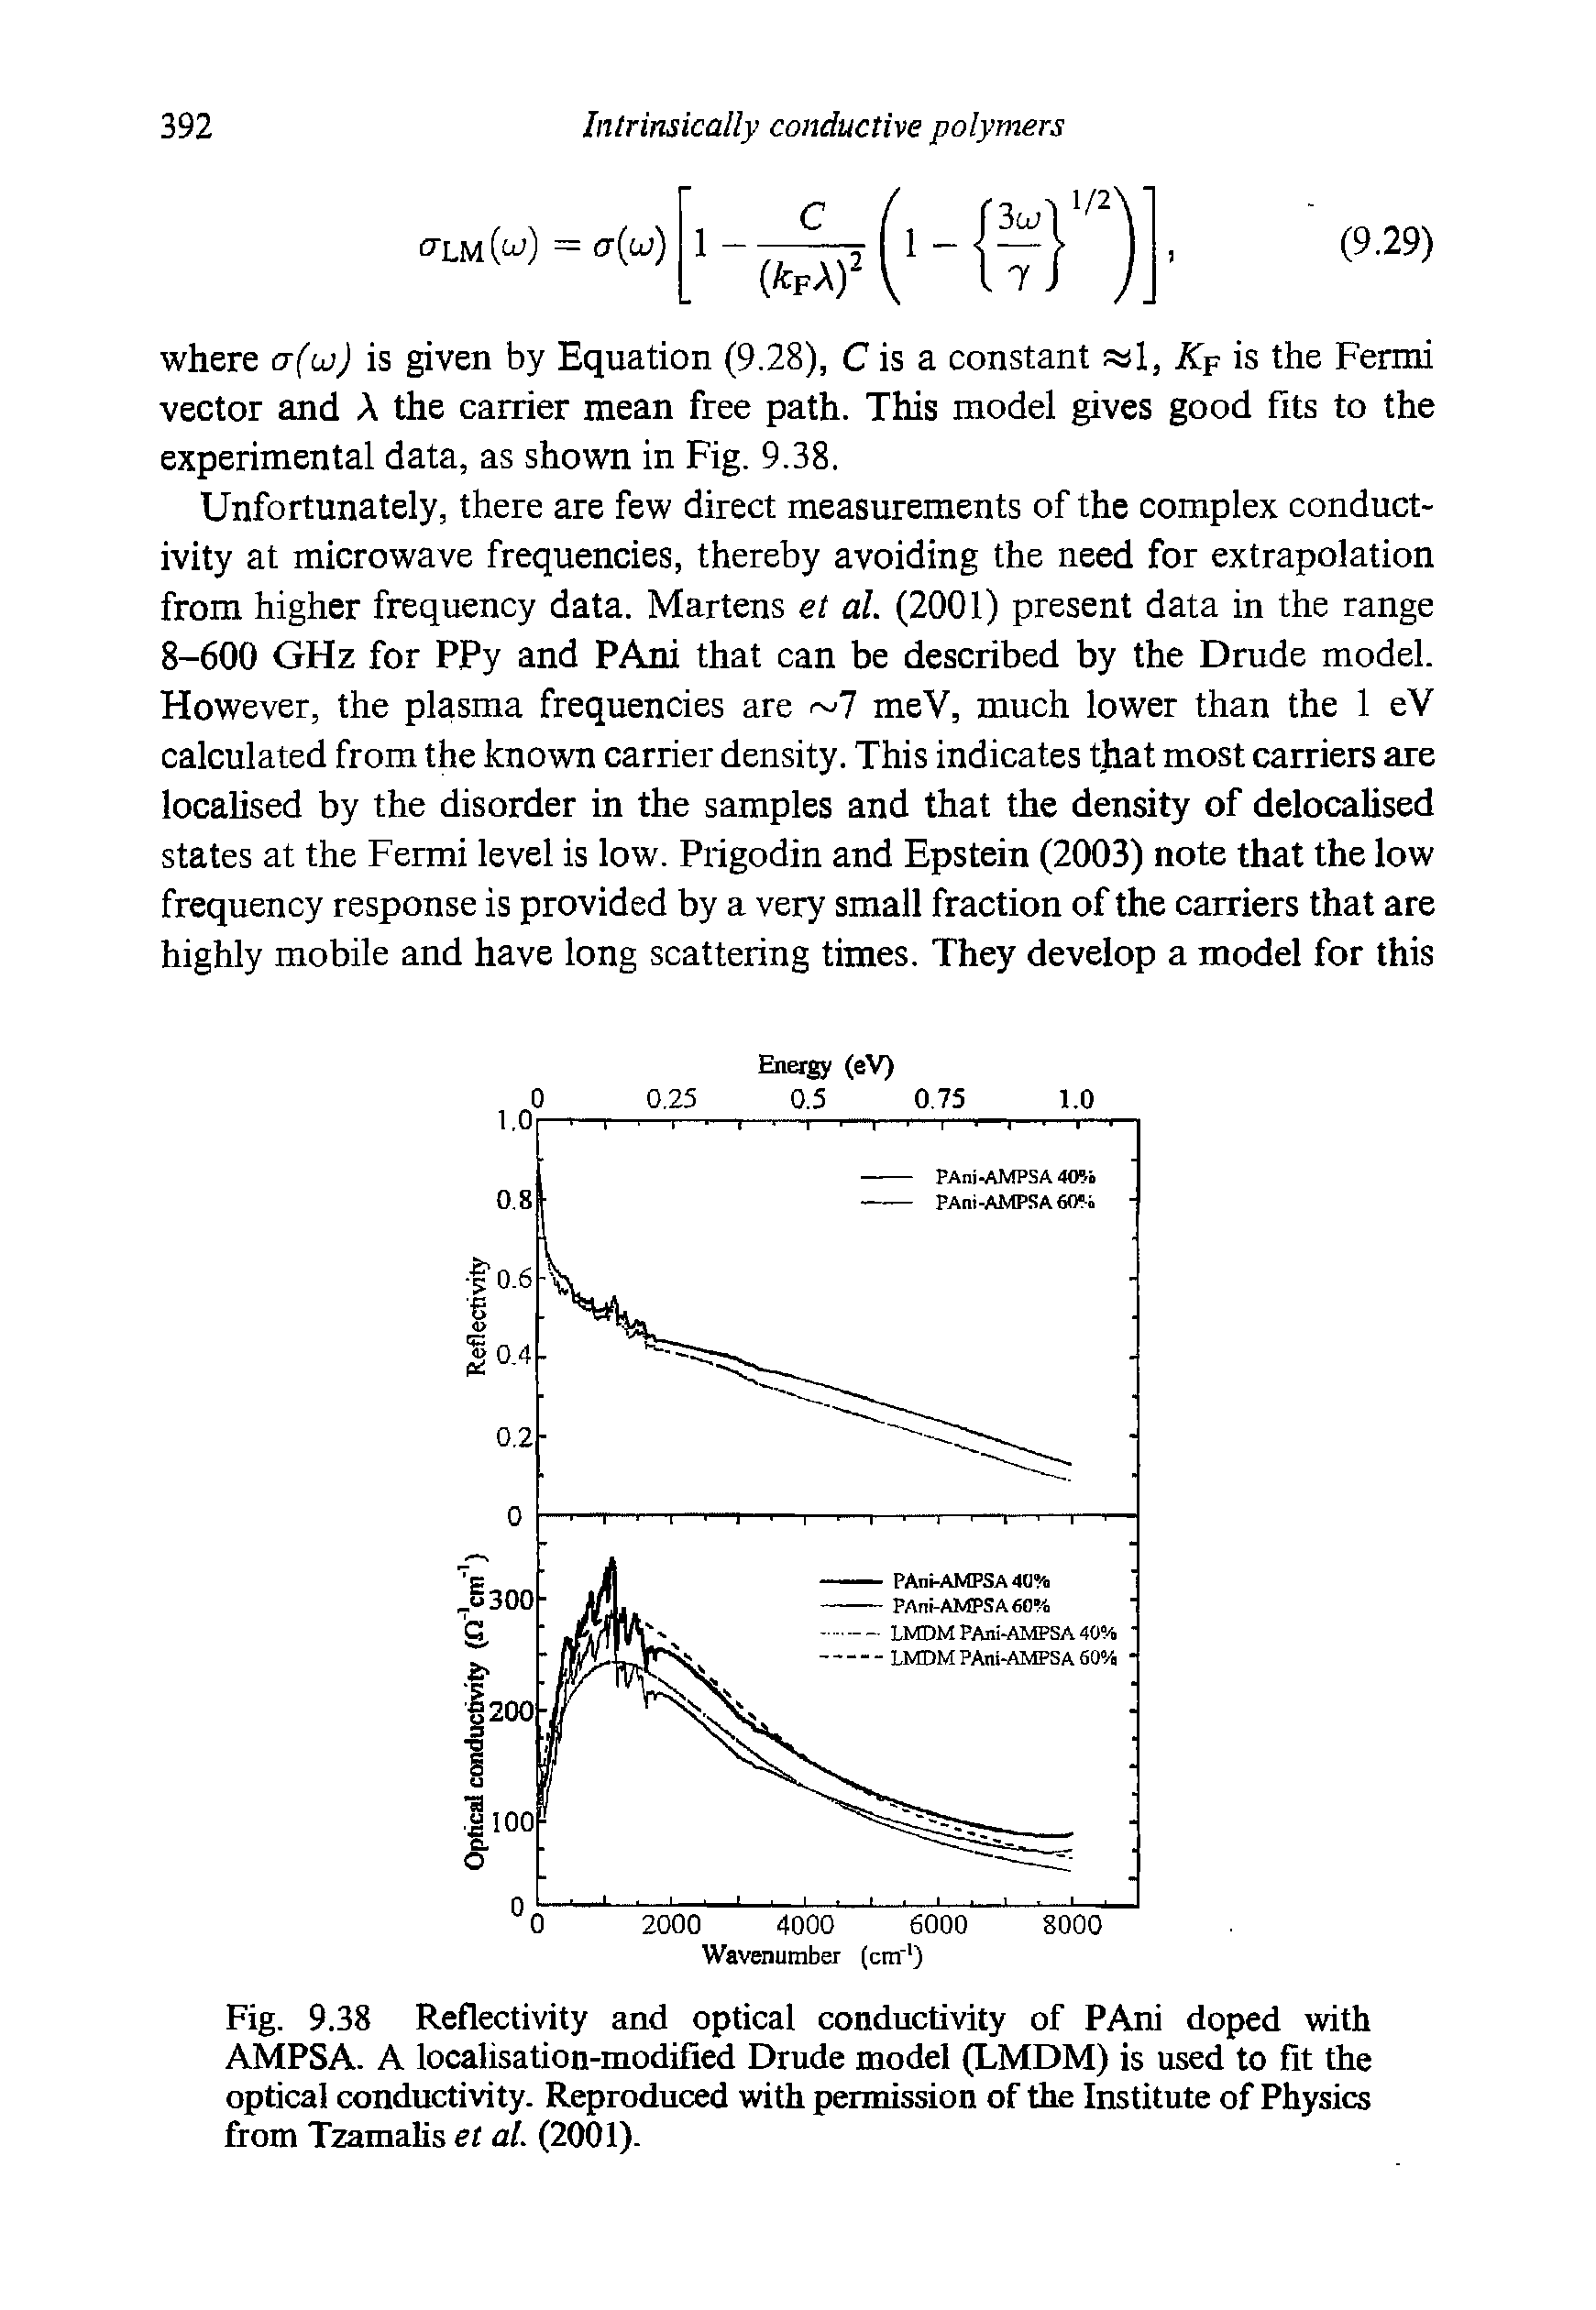 Fig. 9.38 Reflectivity and optical conductivity of PAni doped with AMPSA. A localisation-modified Drude model (LMDM) is used to fit the optical conductivity. Reproduced with permission of the Institute of Physics from Tzamalis et al. (2001).